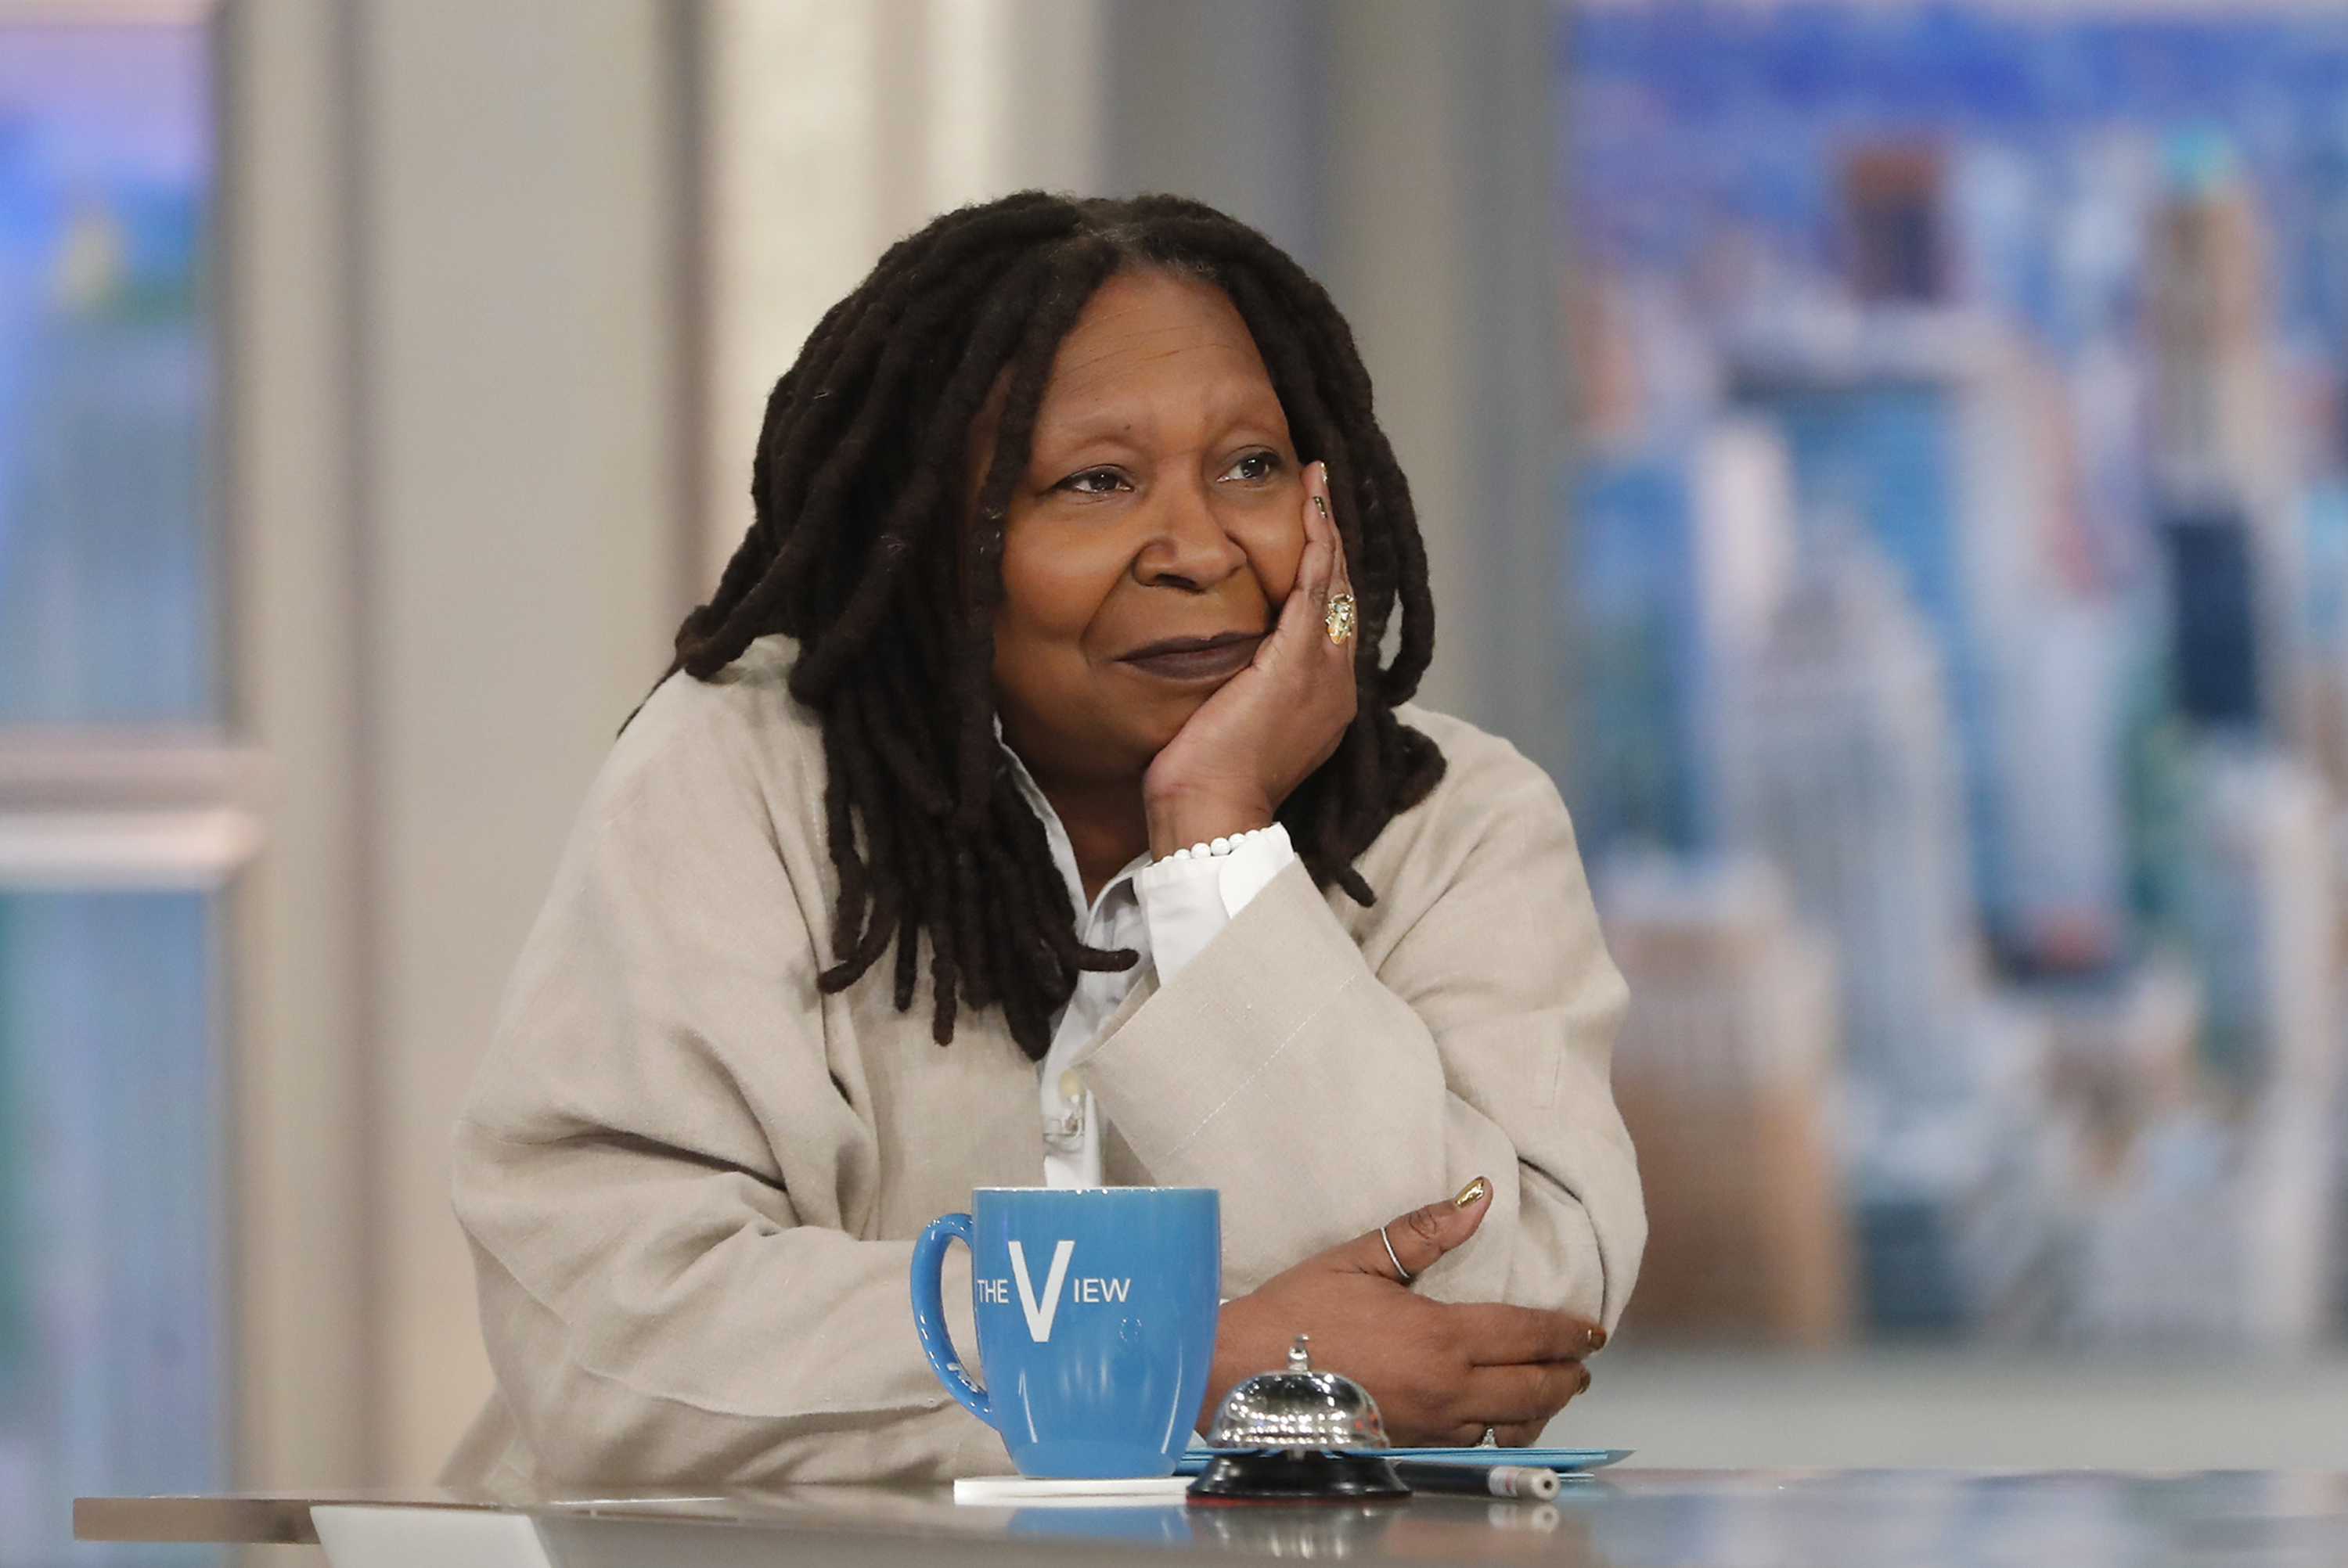 Whoopi Goldberg appears on “The View” on March 29, 2023 | Source: Getty Images